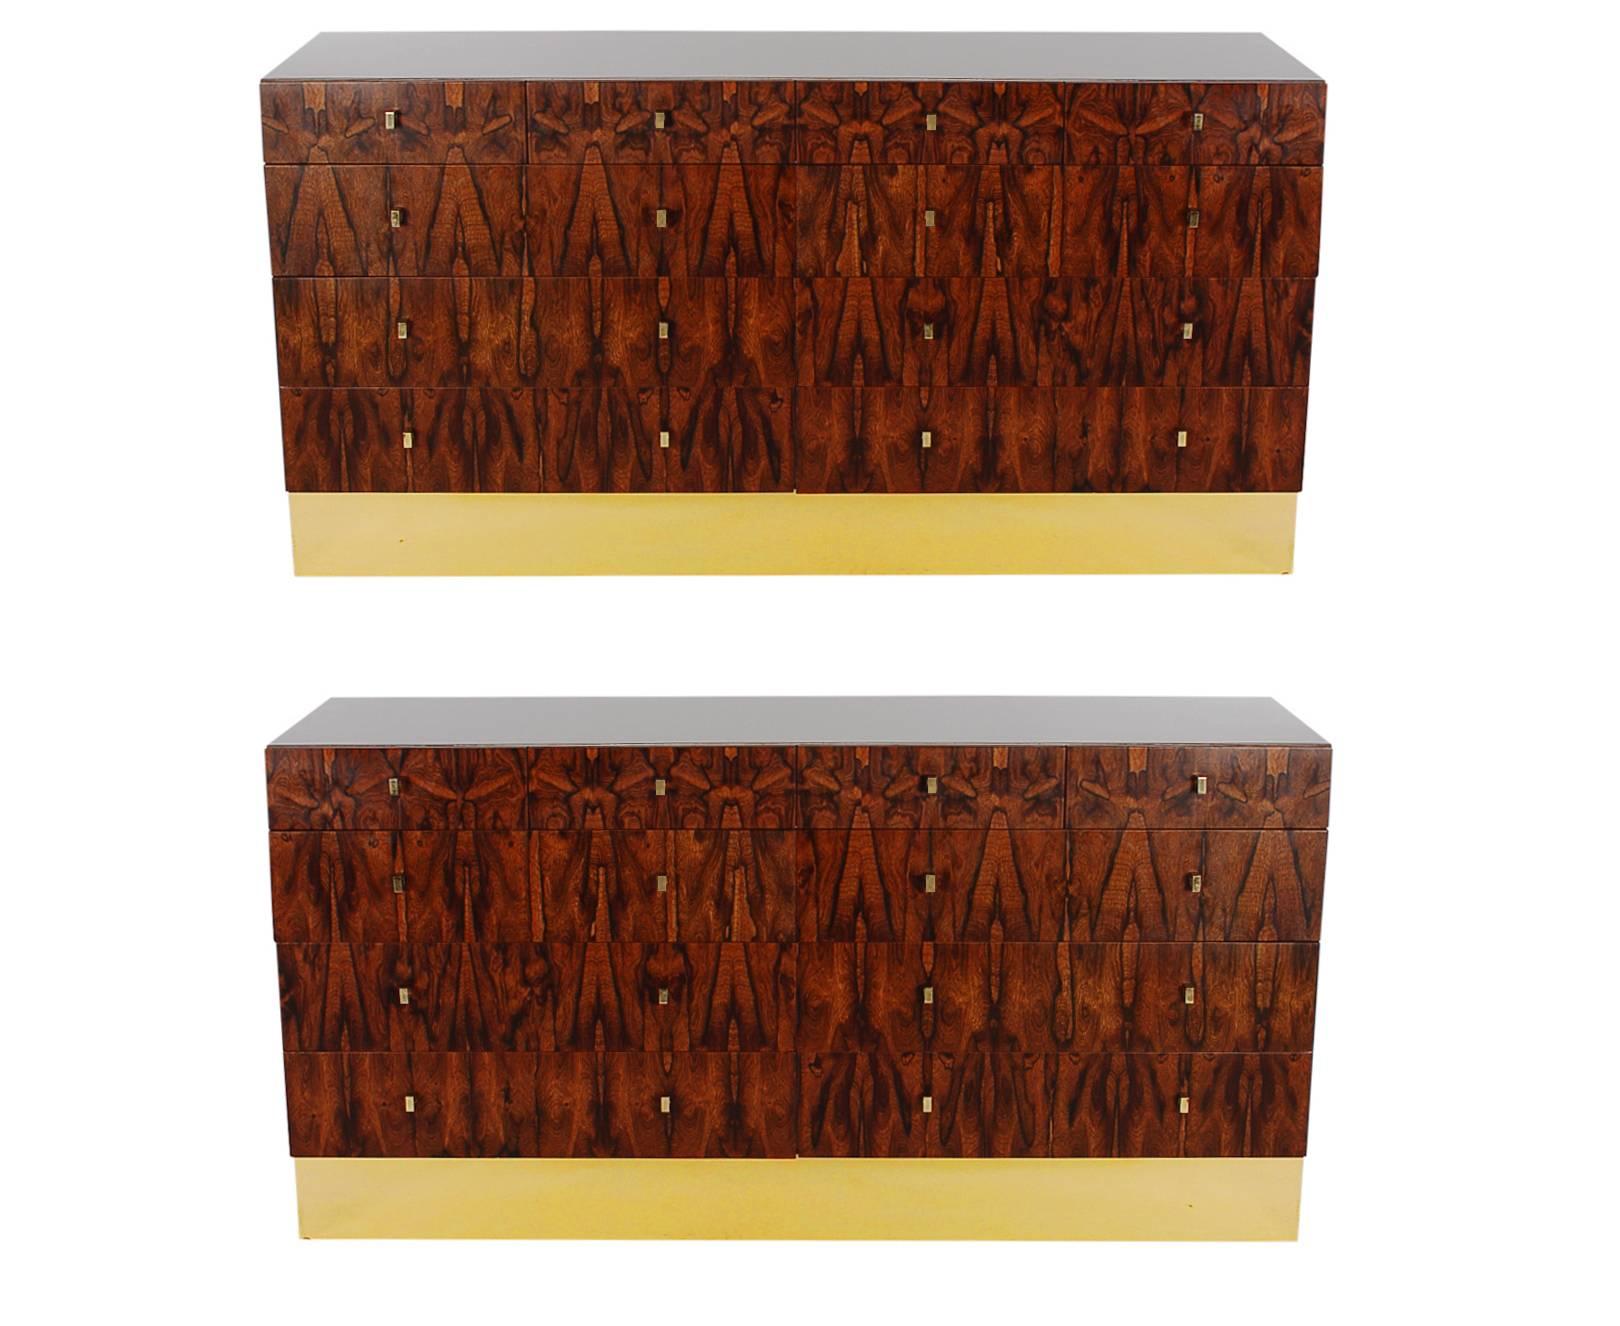 A super handsome and sophisticated pair of ten-drawer dressers or credenzas made by Rougier. They feature well-made laminate cases, with beautiful rosewood drawers, and brass plinth bases. Very much in the style of Milo Baughman. Pair available and